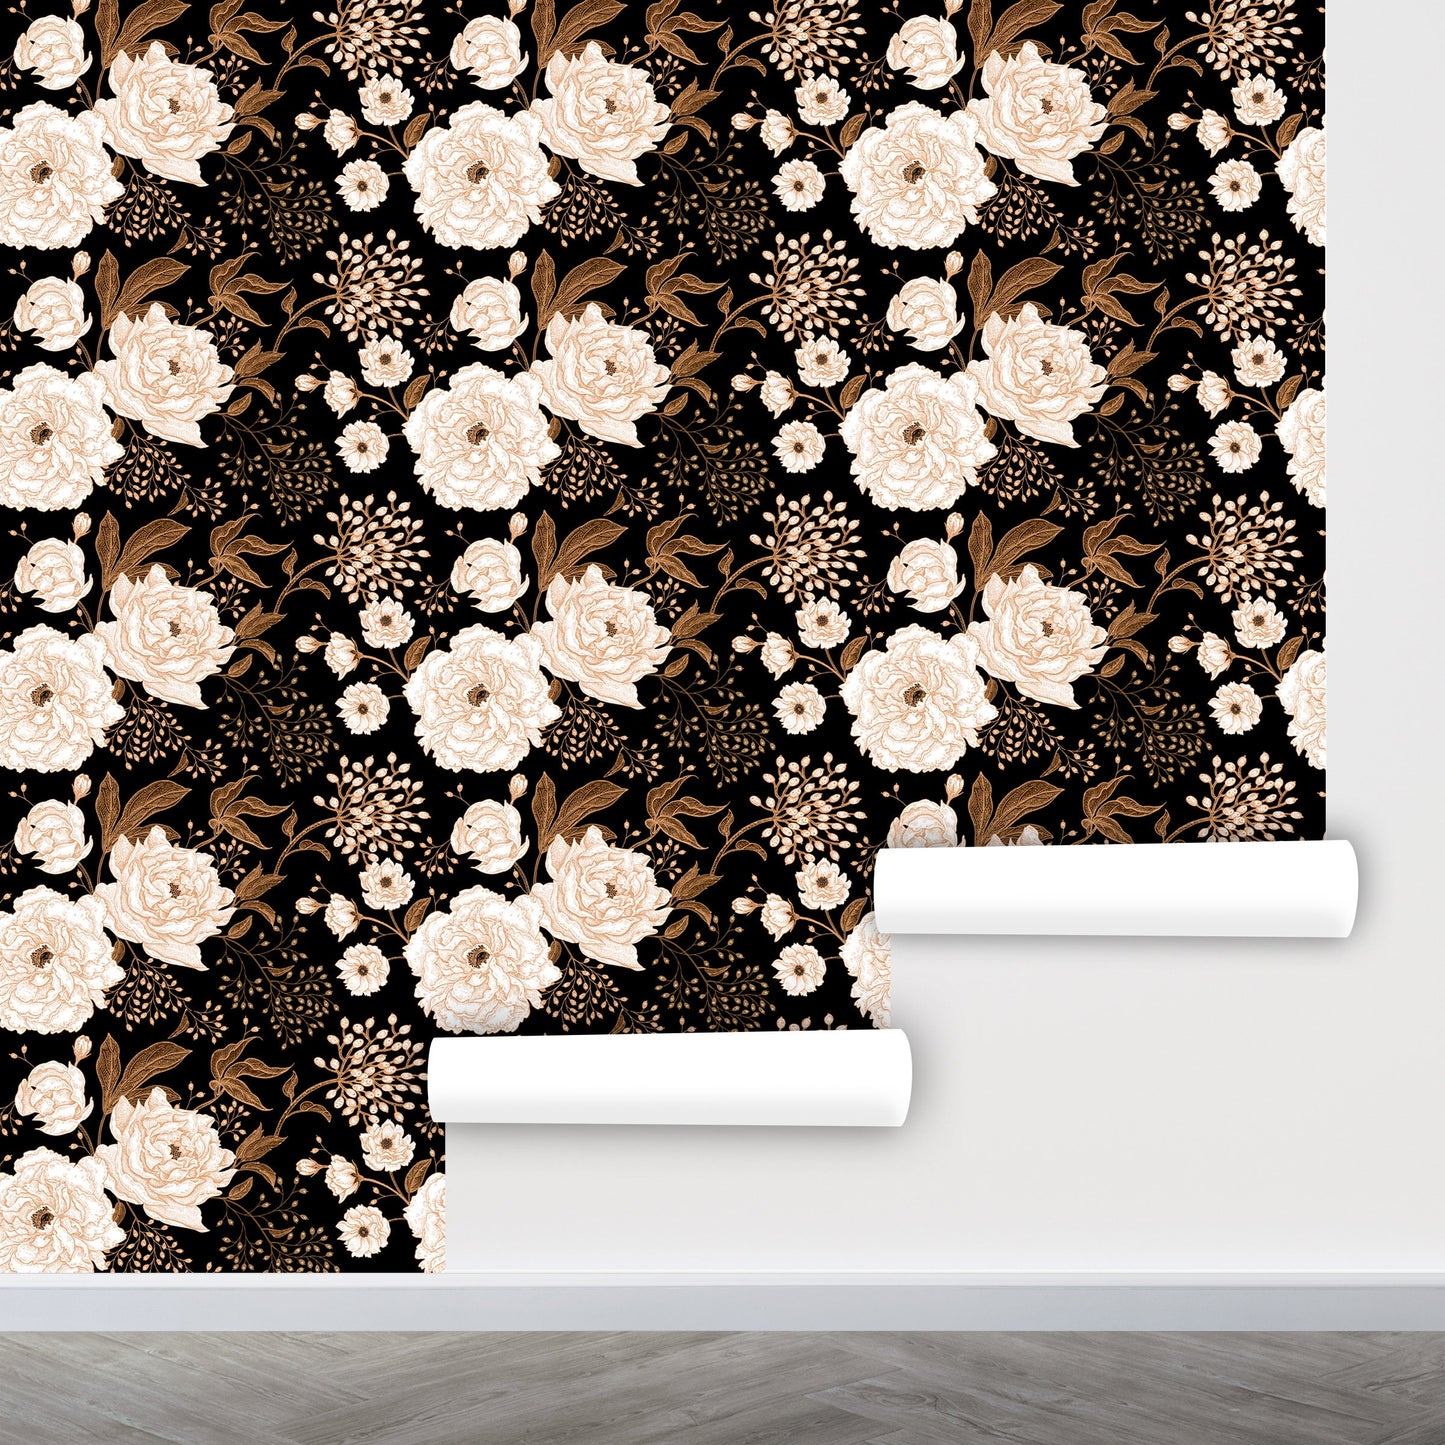 Dark Floral Wallpaper Peel and Stick, Black and White Wallpaper, Big Flower Wallpaper, Peony Wallpaper, Removable Wall Paper